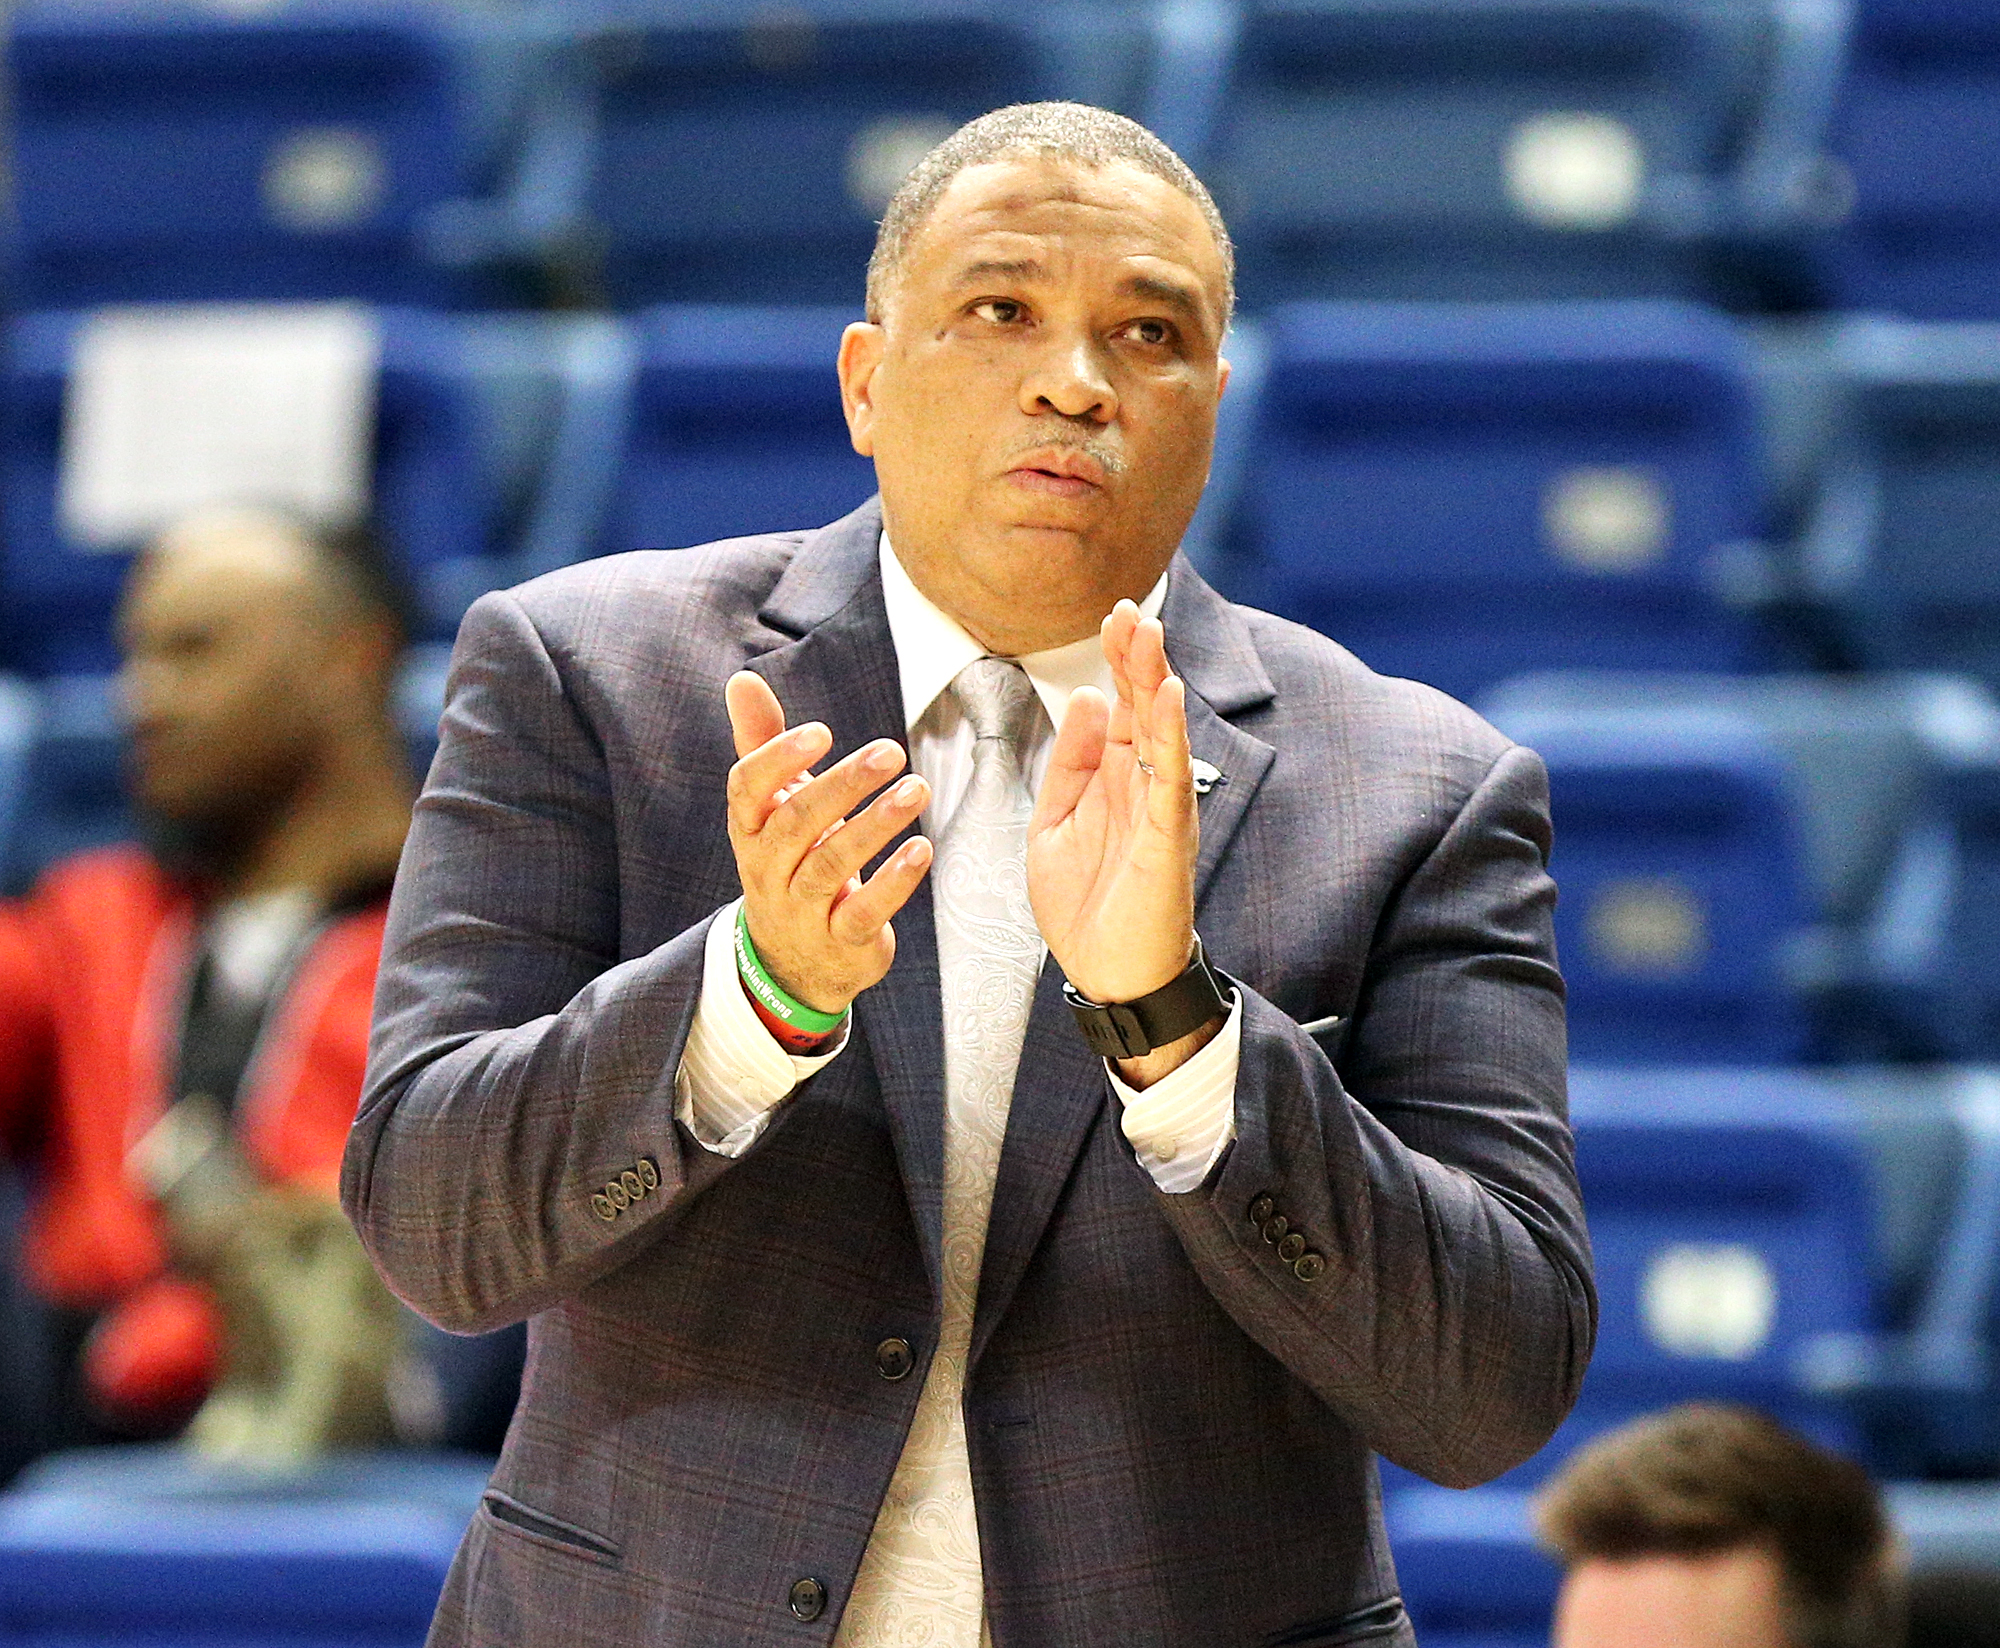 South Alabama women's basketball coach Terry Fowler out after 10 seasons -  